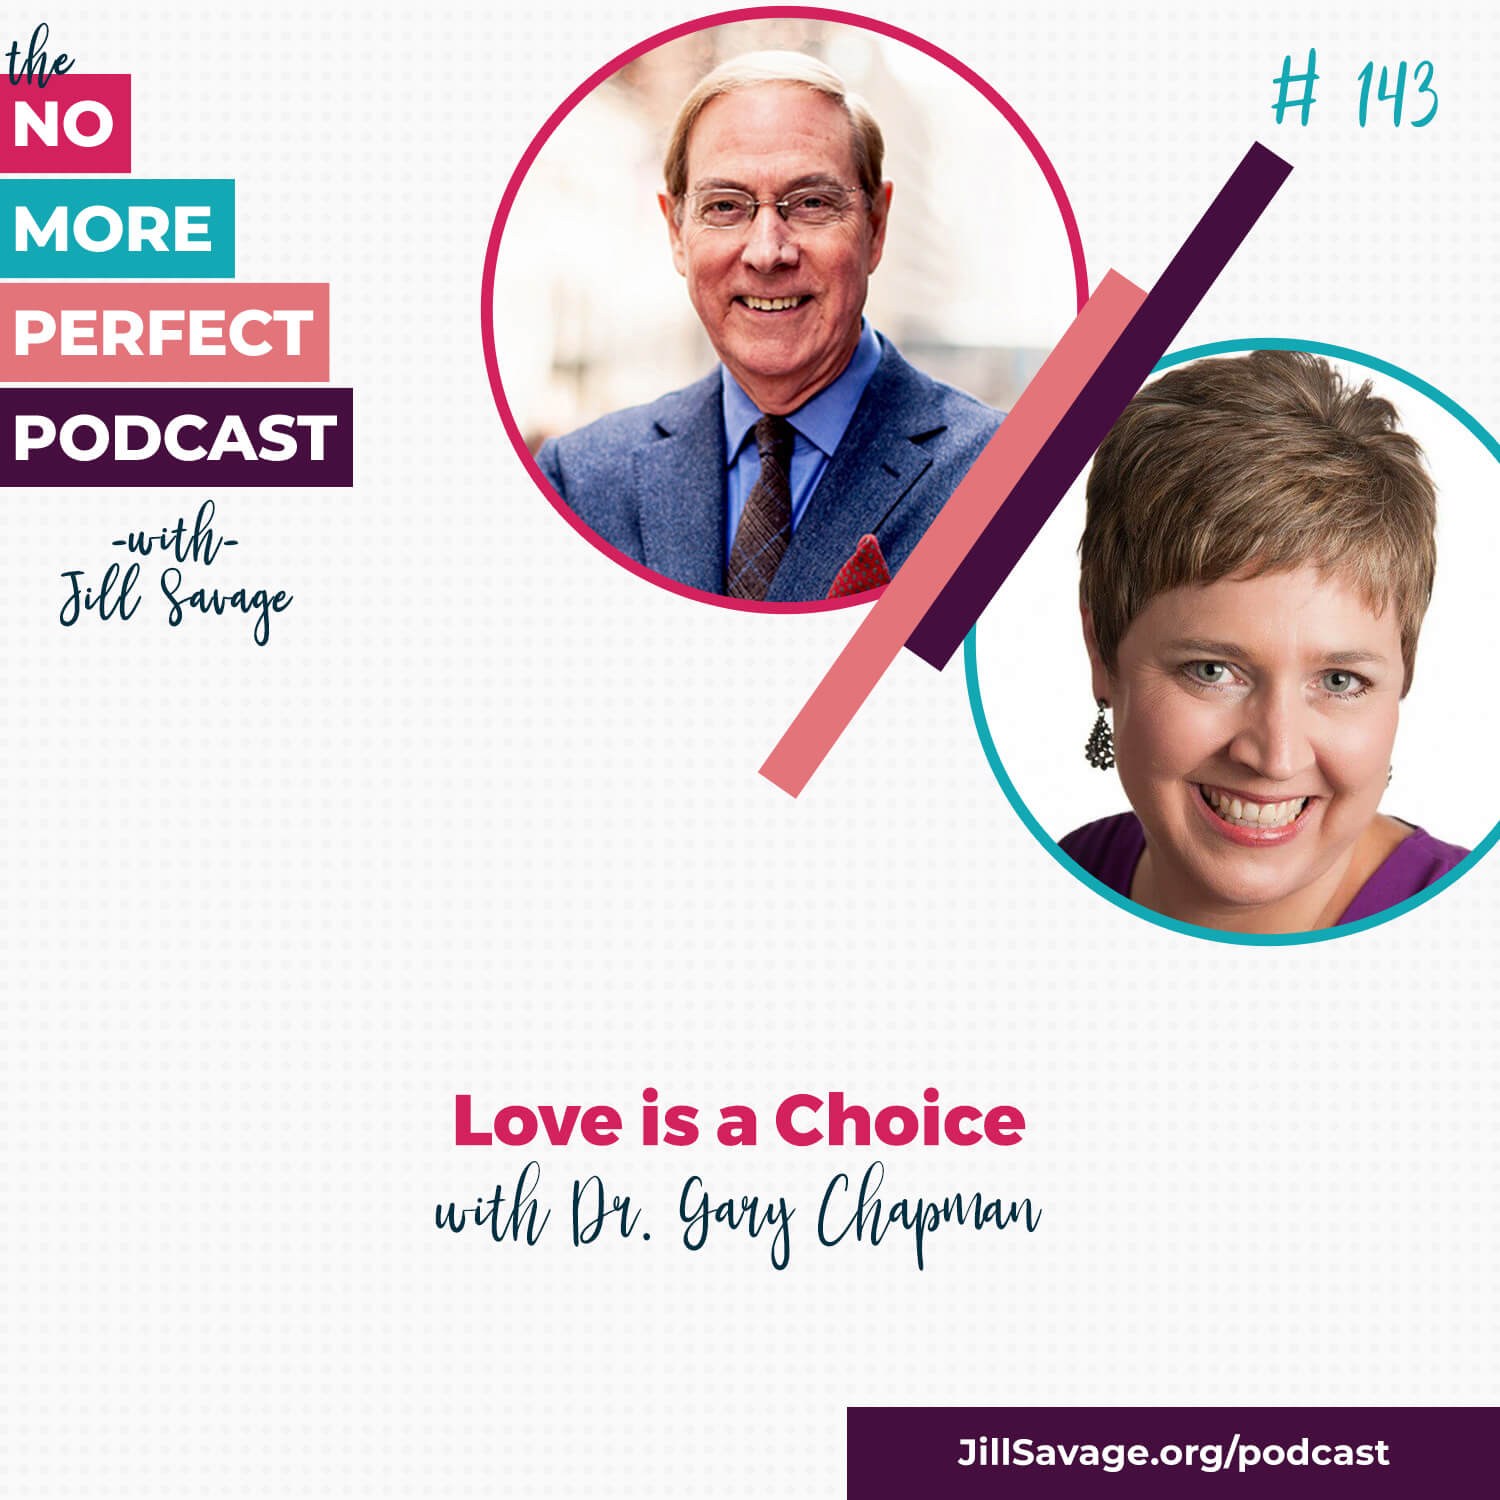 Love is a Choice with Dr. Gary Chapman | Episode 143